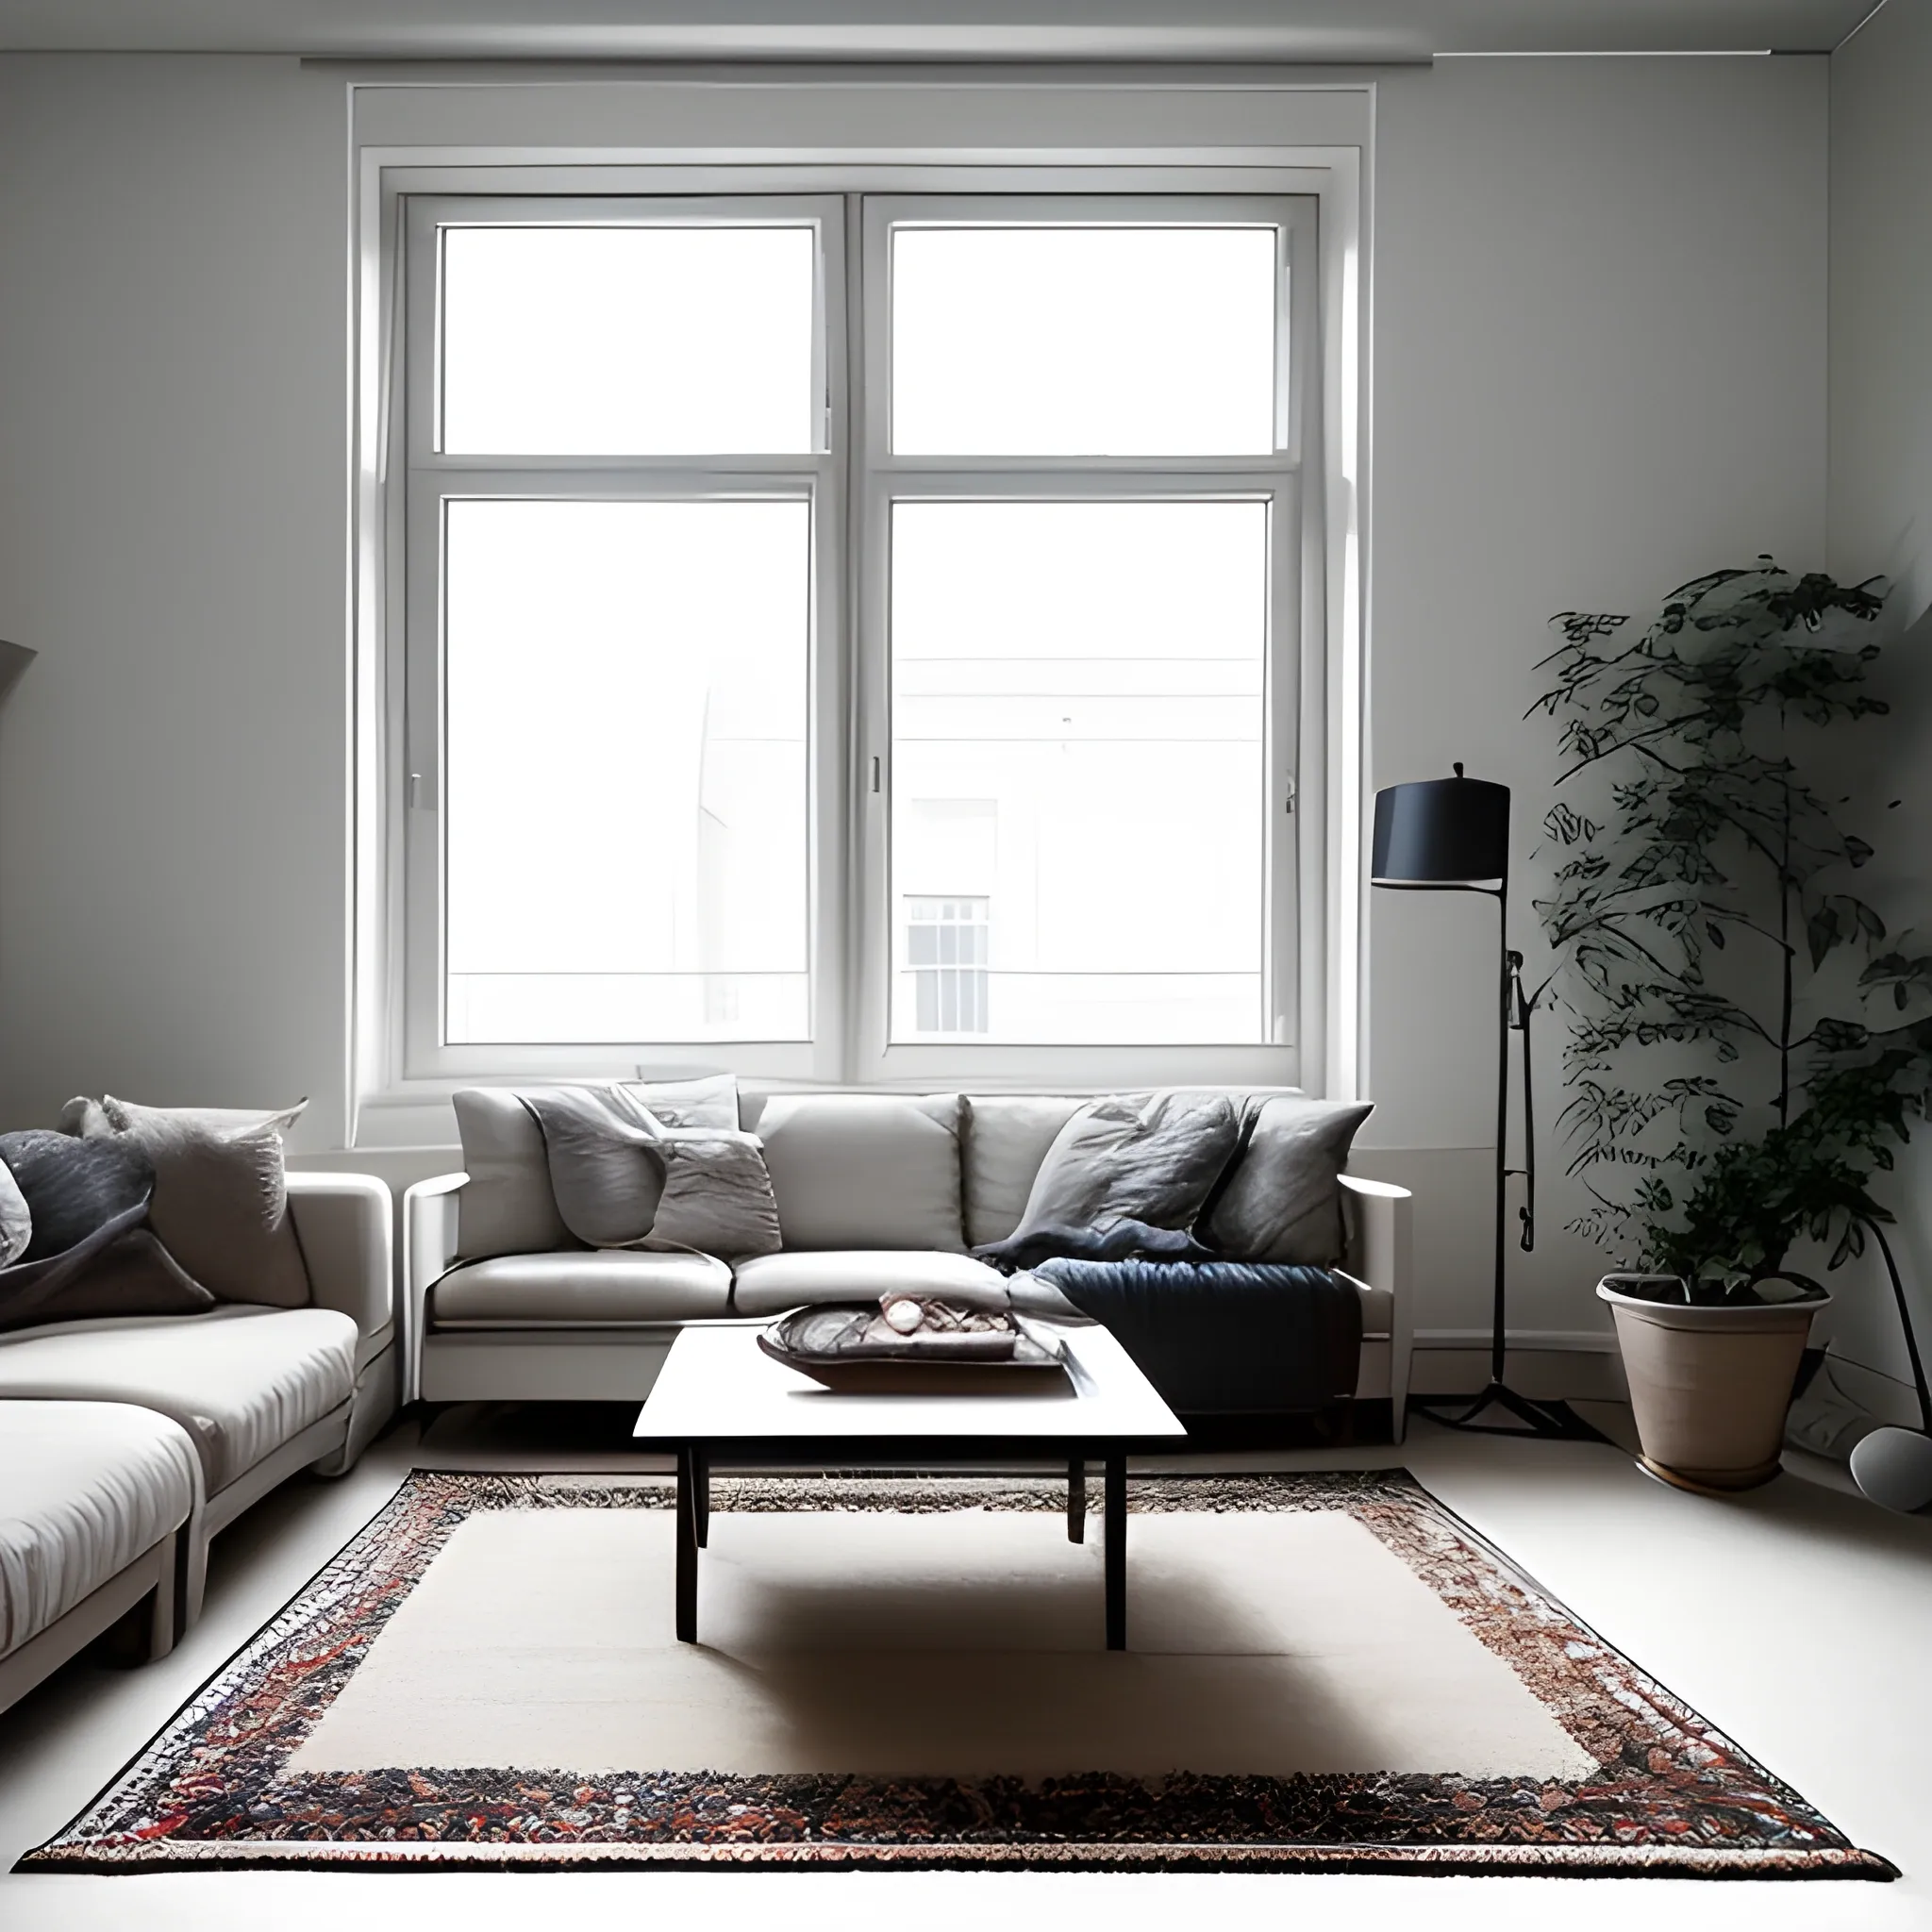 extremely detailed Raw photo, interior design minimalistic living room, studio quality, ambient lighting, 30mm,perfect window,textiles pillows, detailed carpet,high-resolution photography,perfect composition